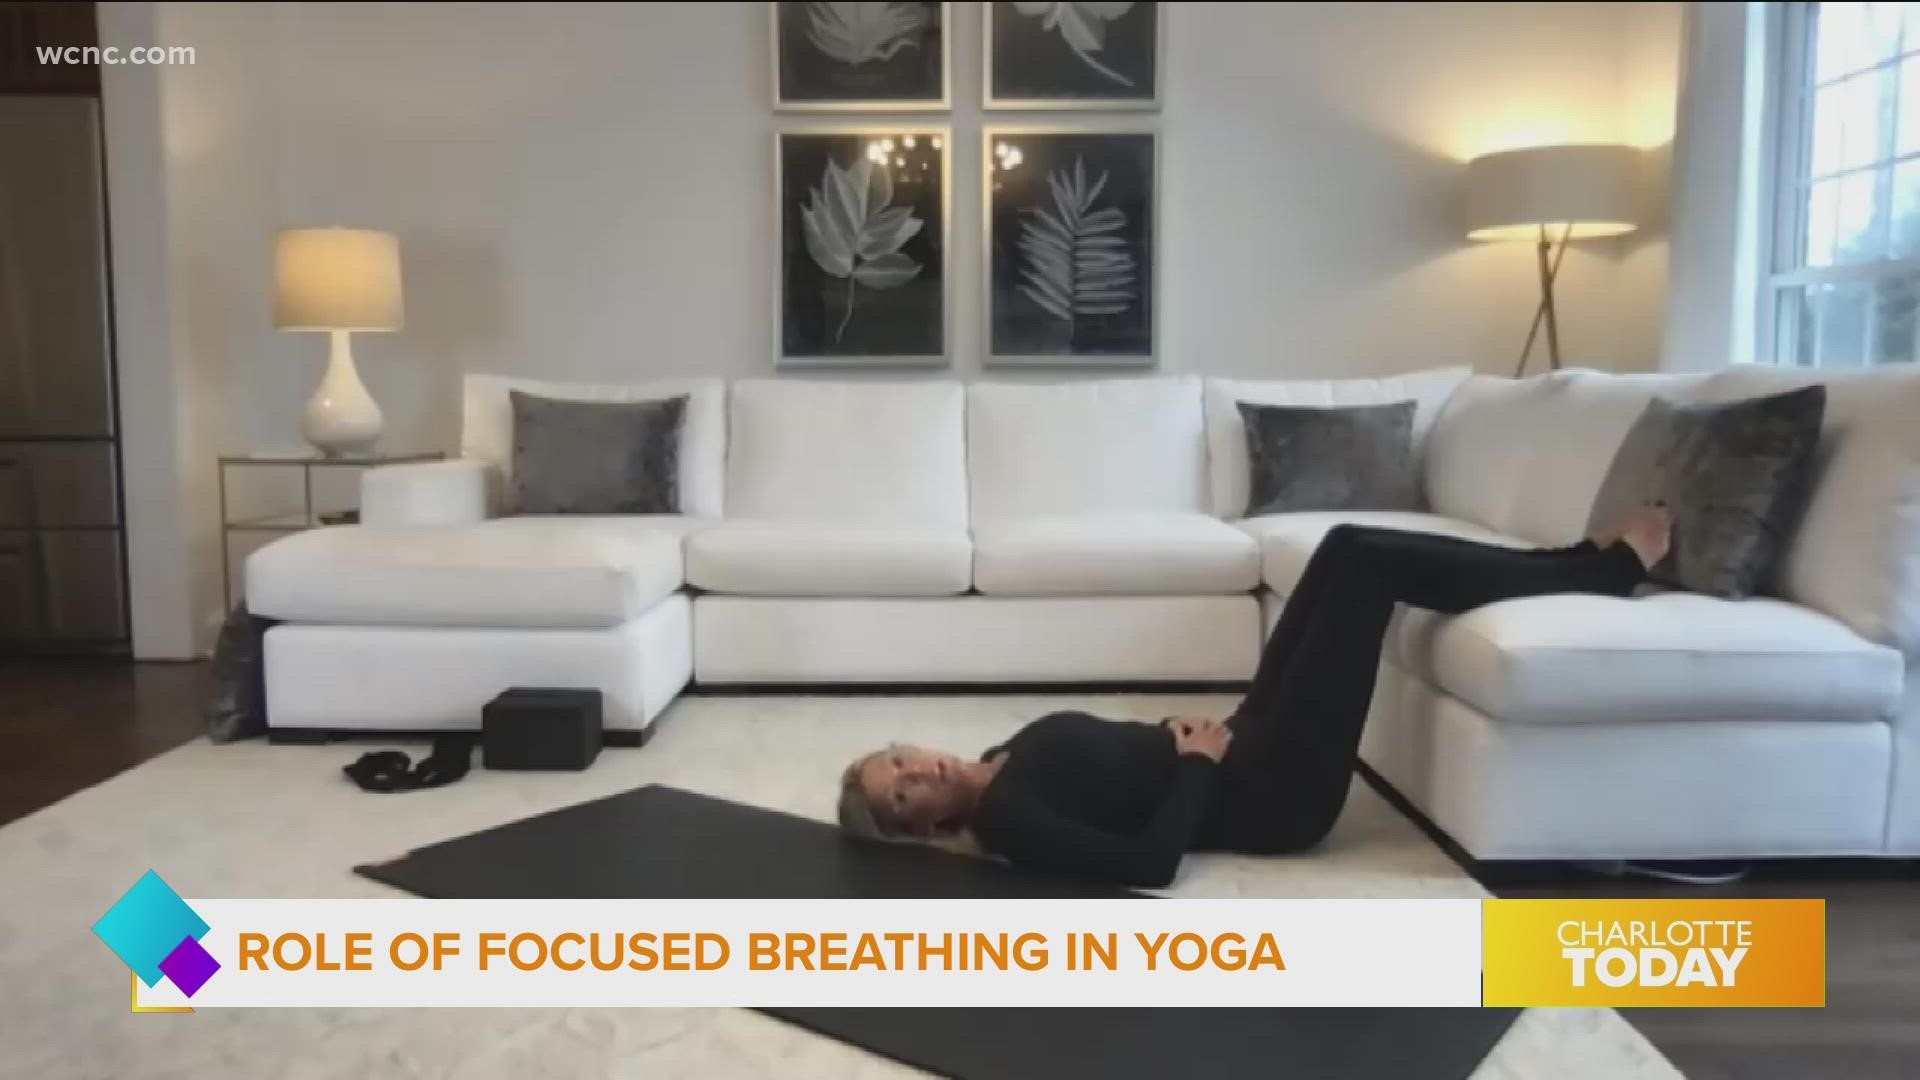 Controlling your breath while practicing yoga is so important